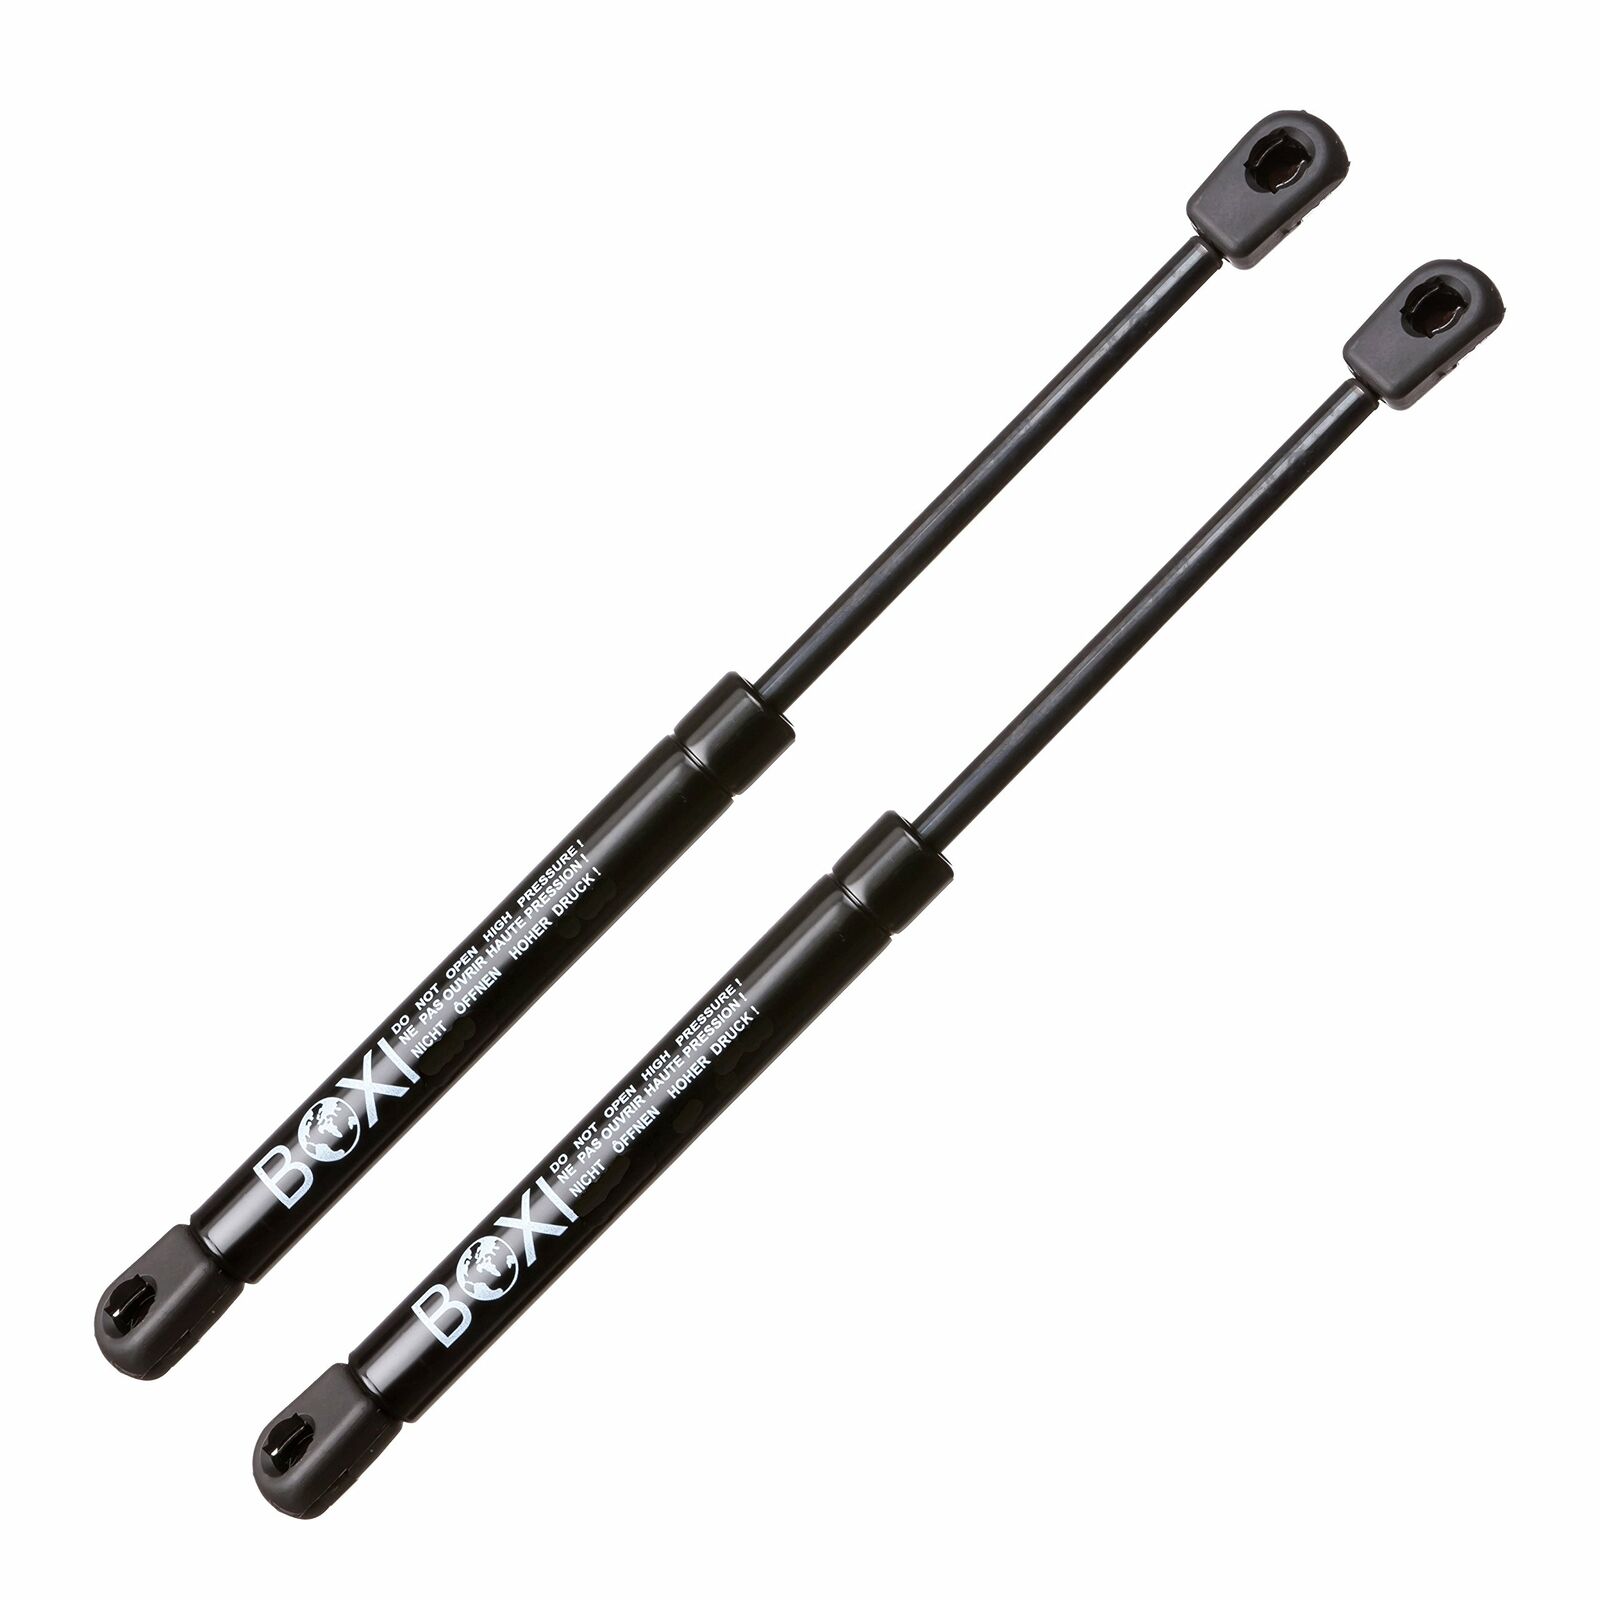 2QTY TAILGATE LIFT SUPPORT STRUT SHOCK FOR FORD ESCORT, MERCURY TRACER 1991-1997